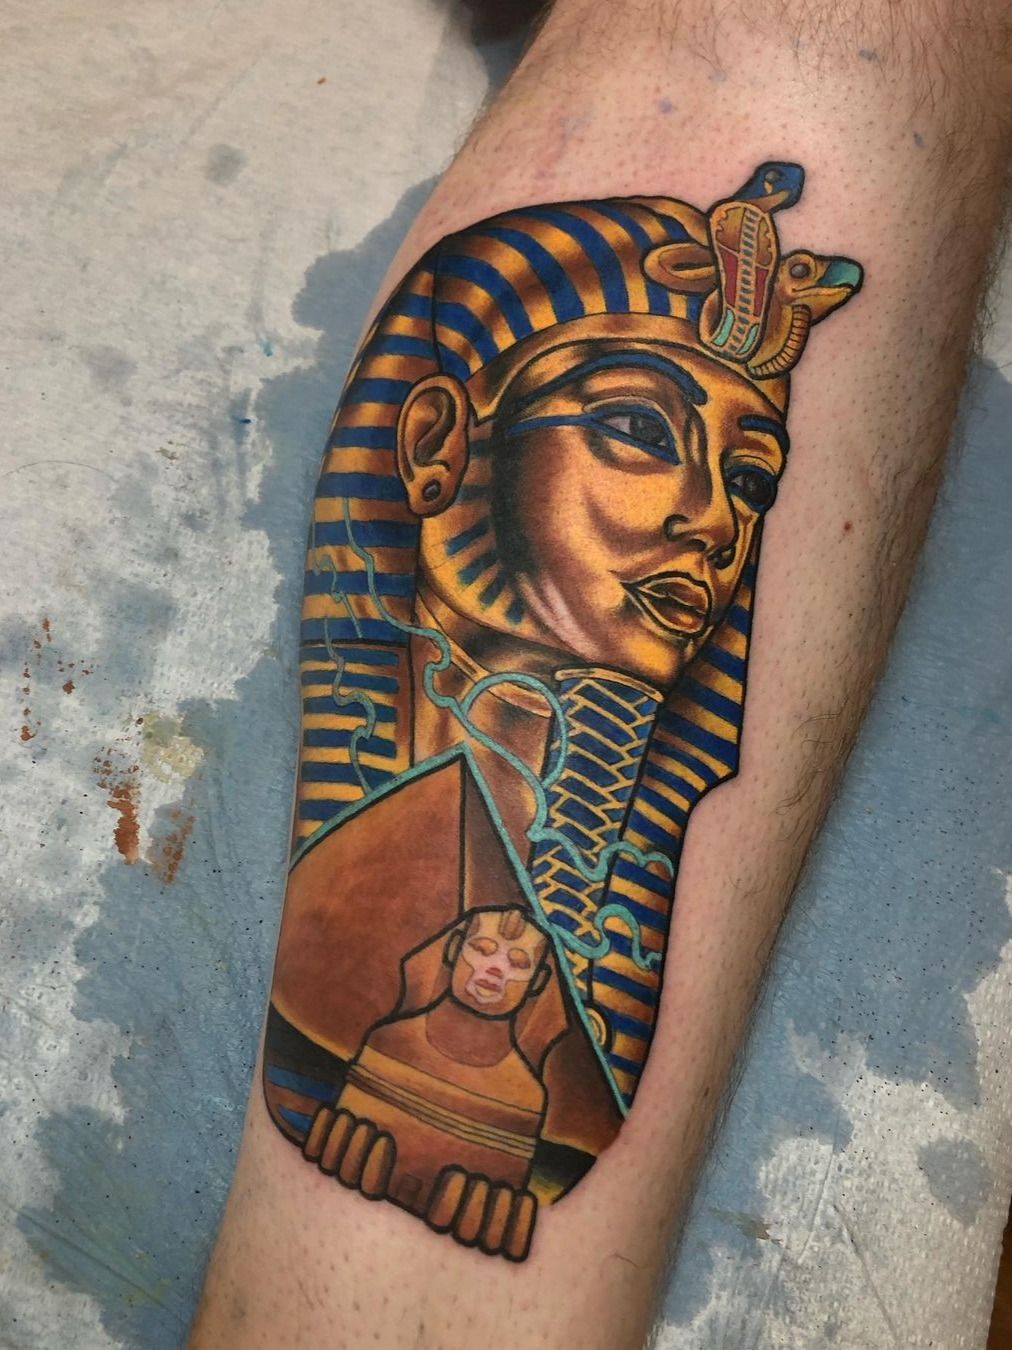 15 Kinds of Egyptian Tattoos and Their Meanings - wormholetattoo's blog